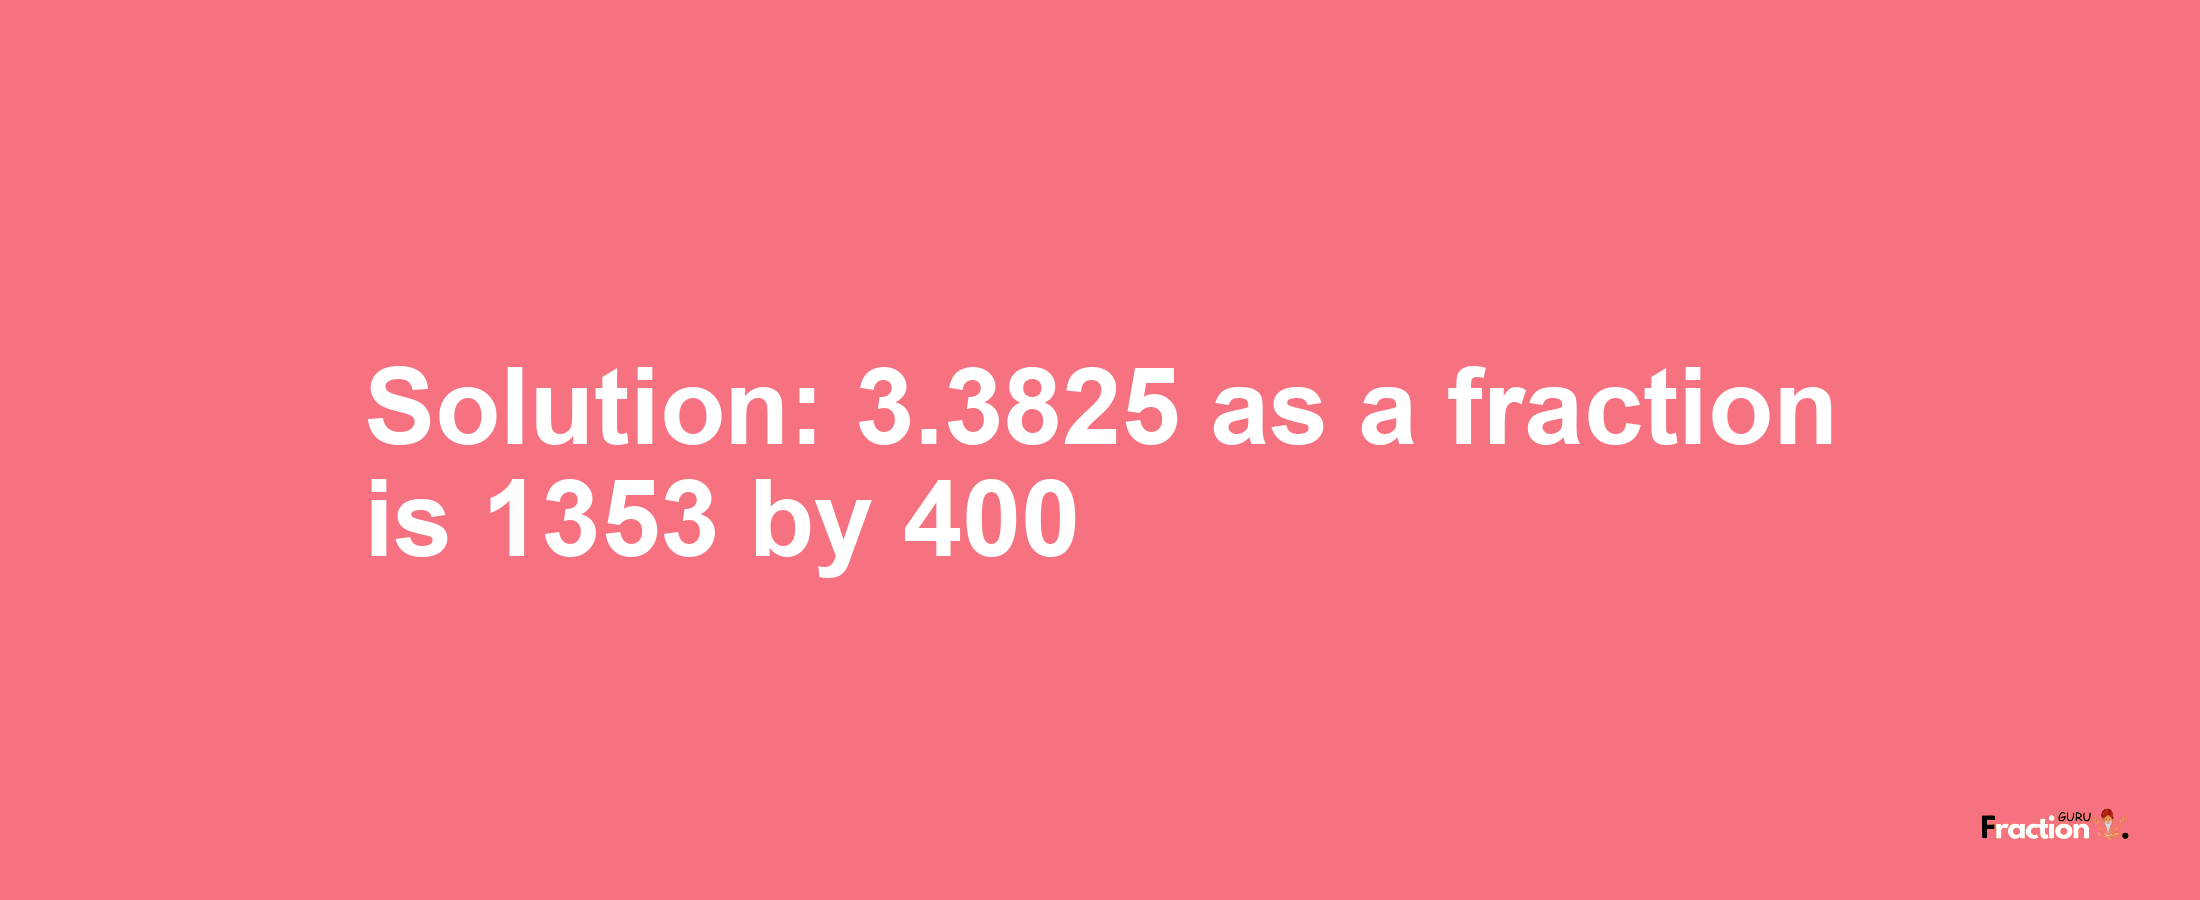 Solution:3.3825 as a fraction is 1353/400